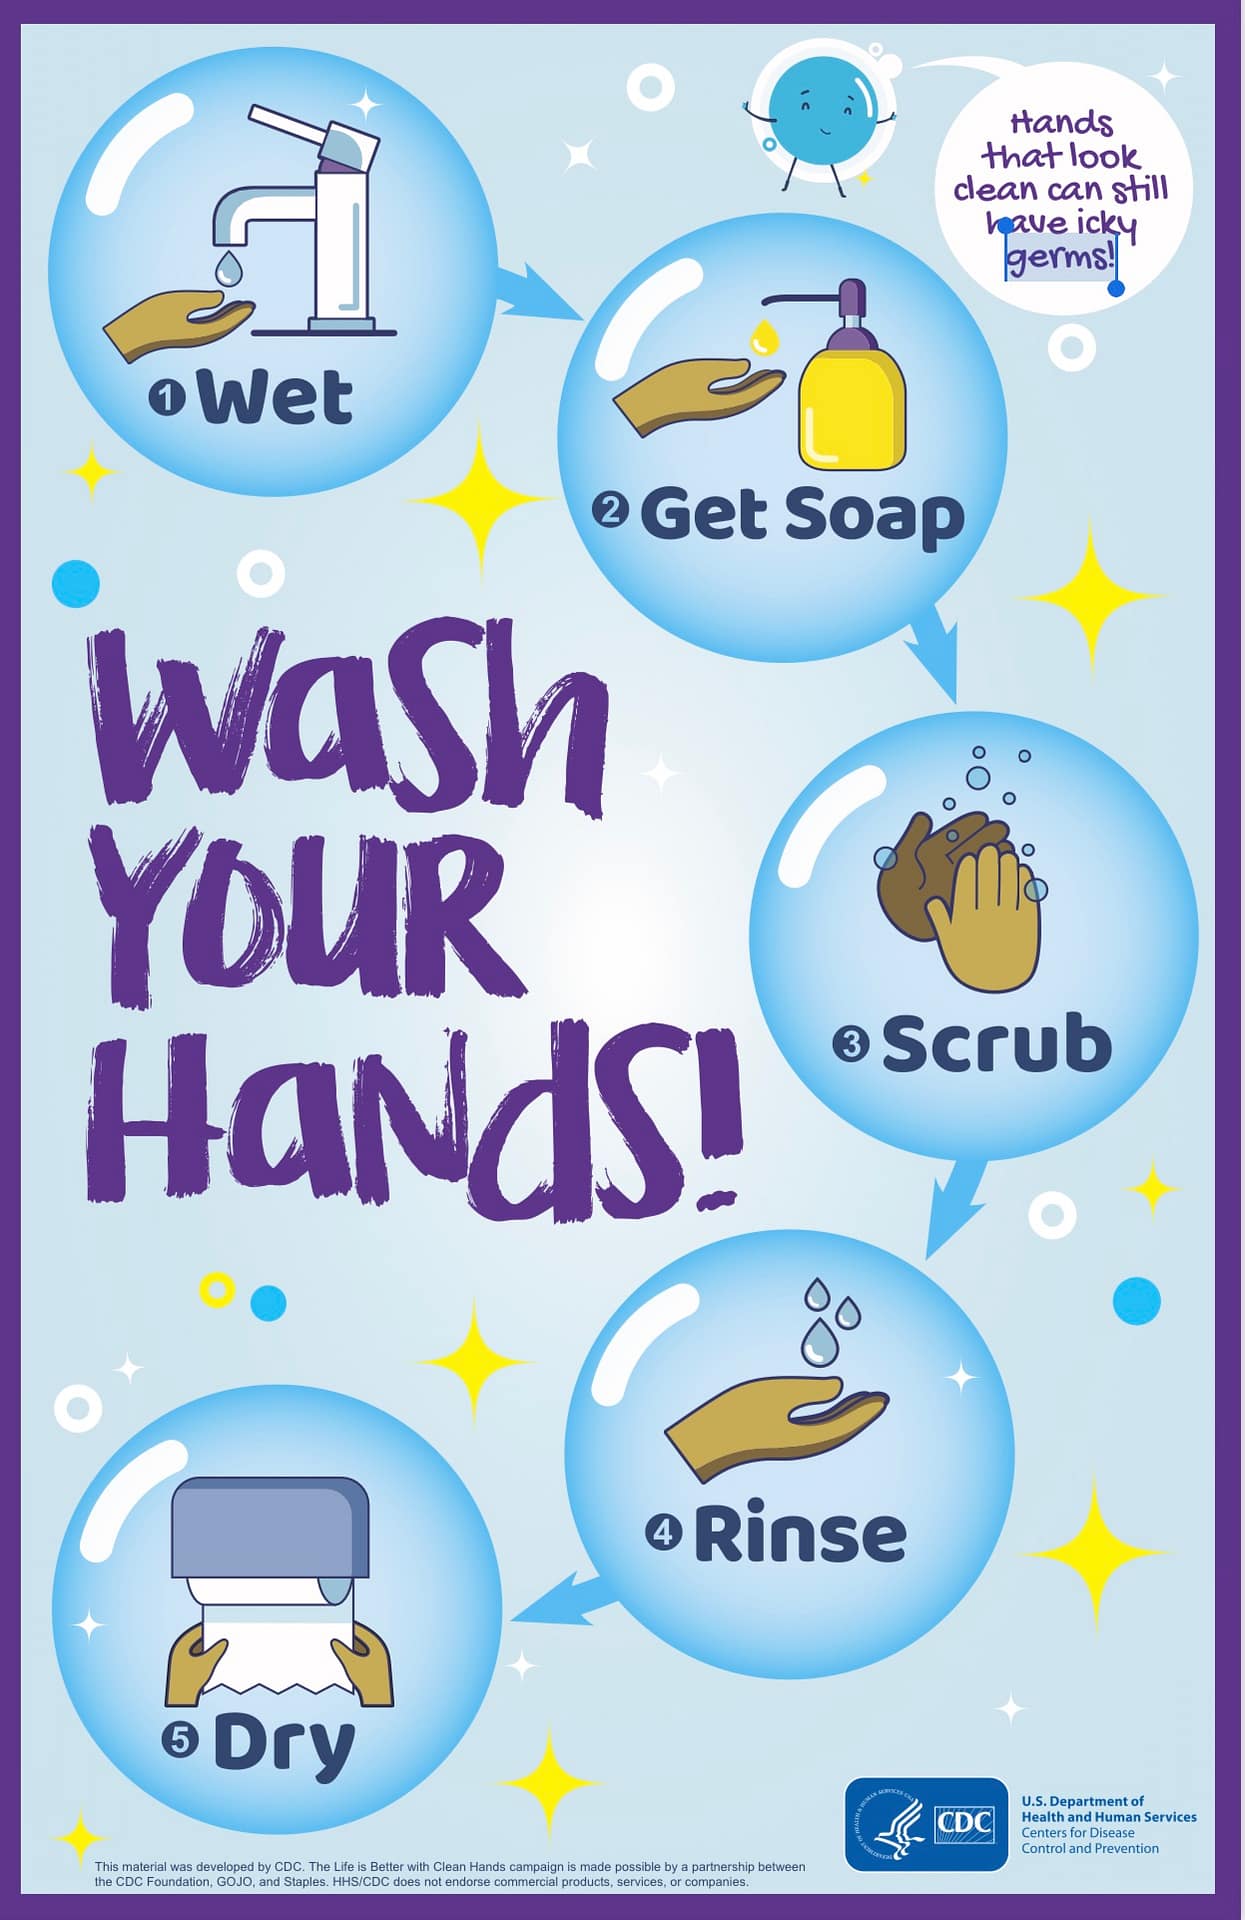 CDC recommended hand washing procedures.